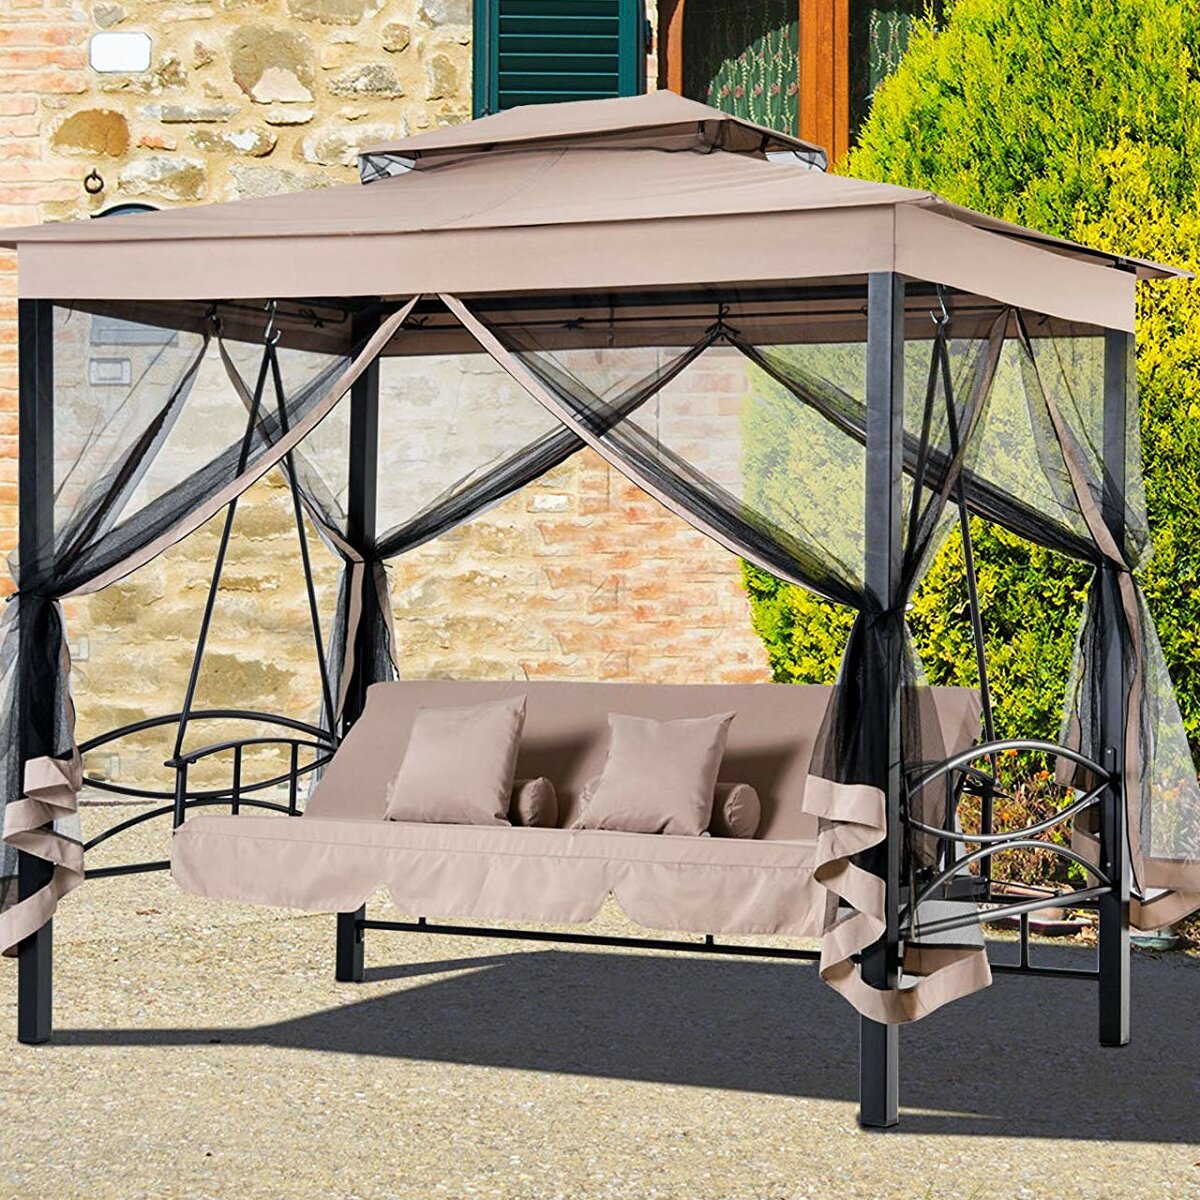 Patio Swing Daybed With Gazebo